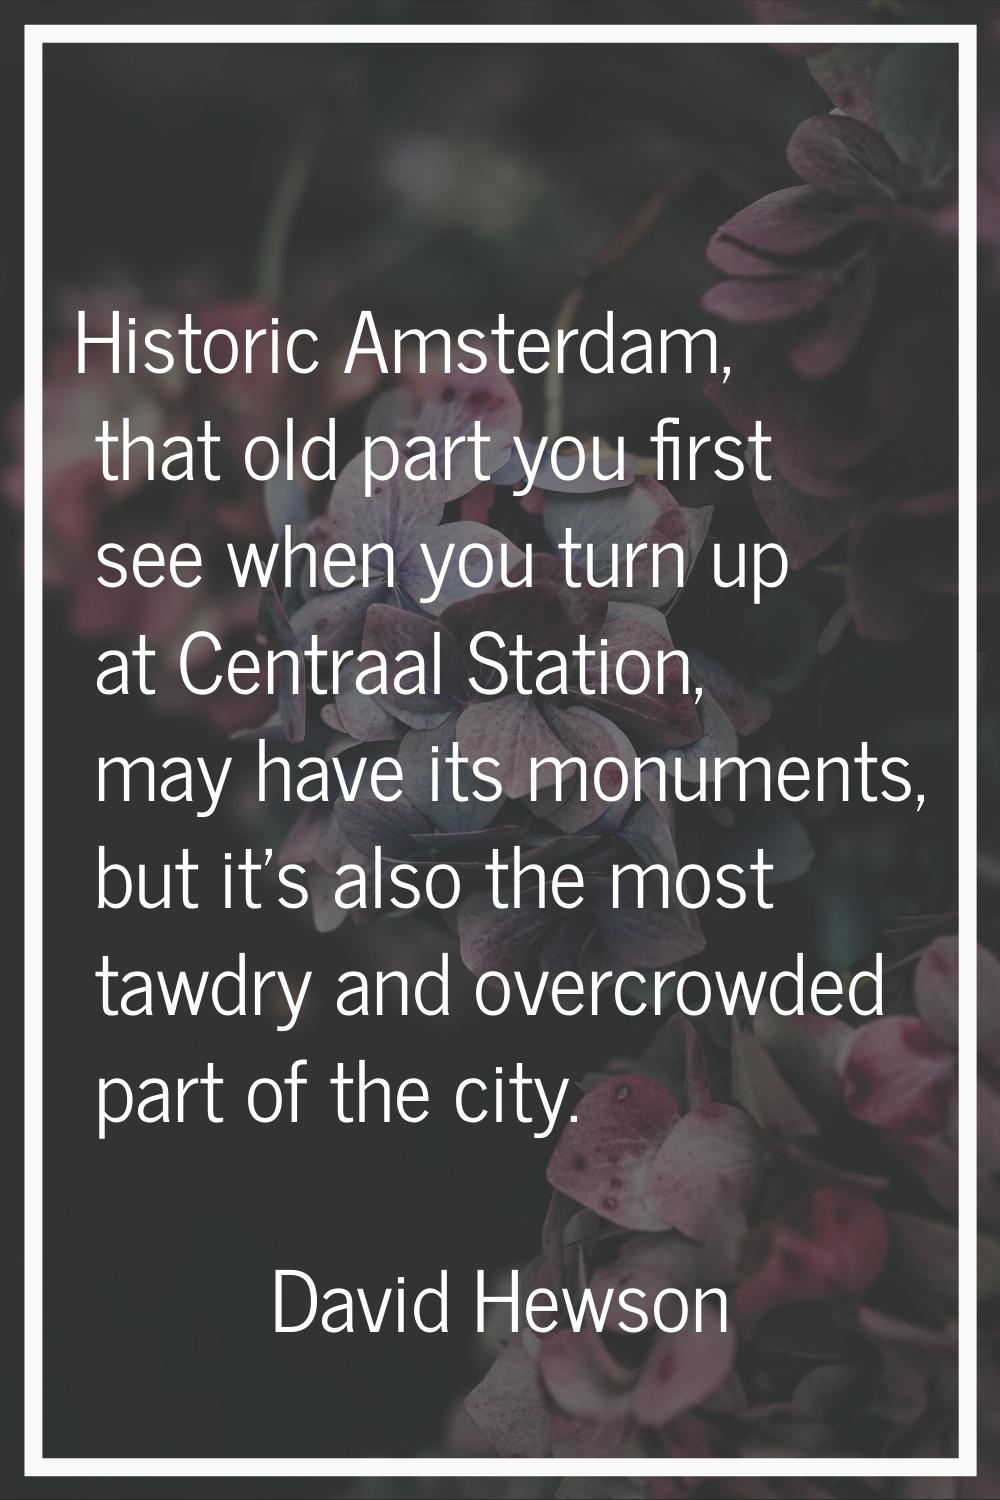 Historic Amsterdam, that old part you first see when you turn up at Centraal Station, may have its 